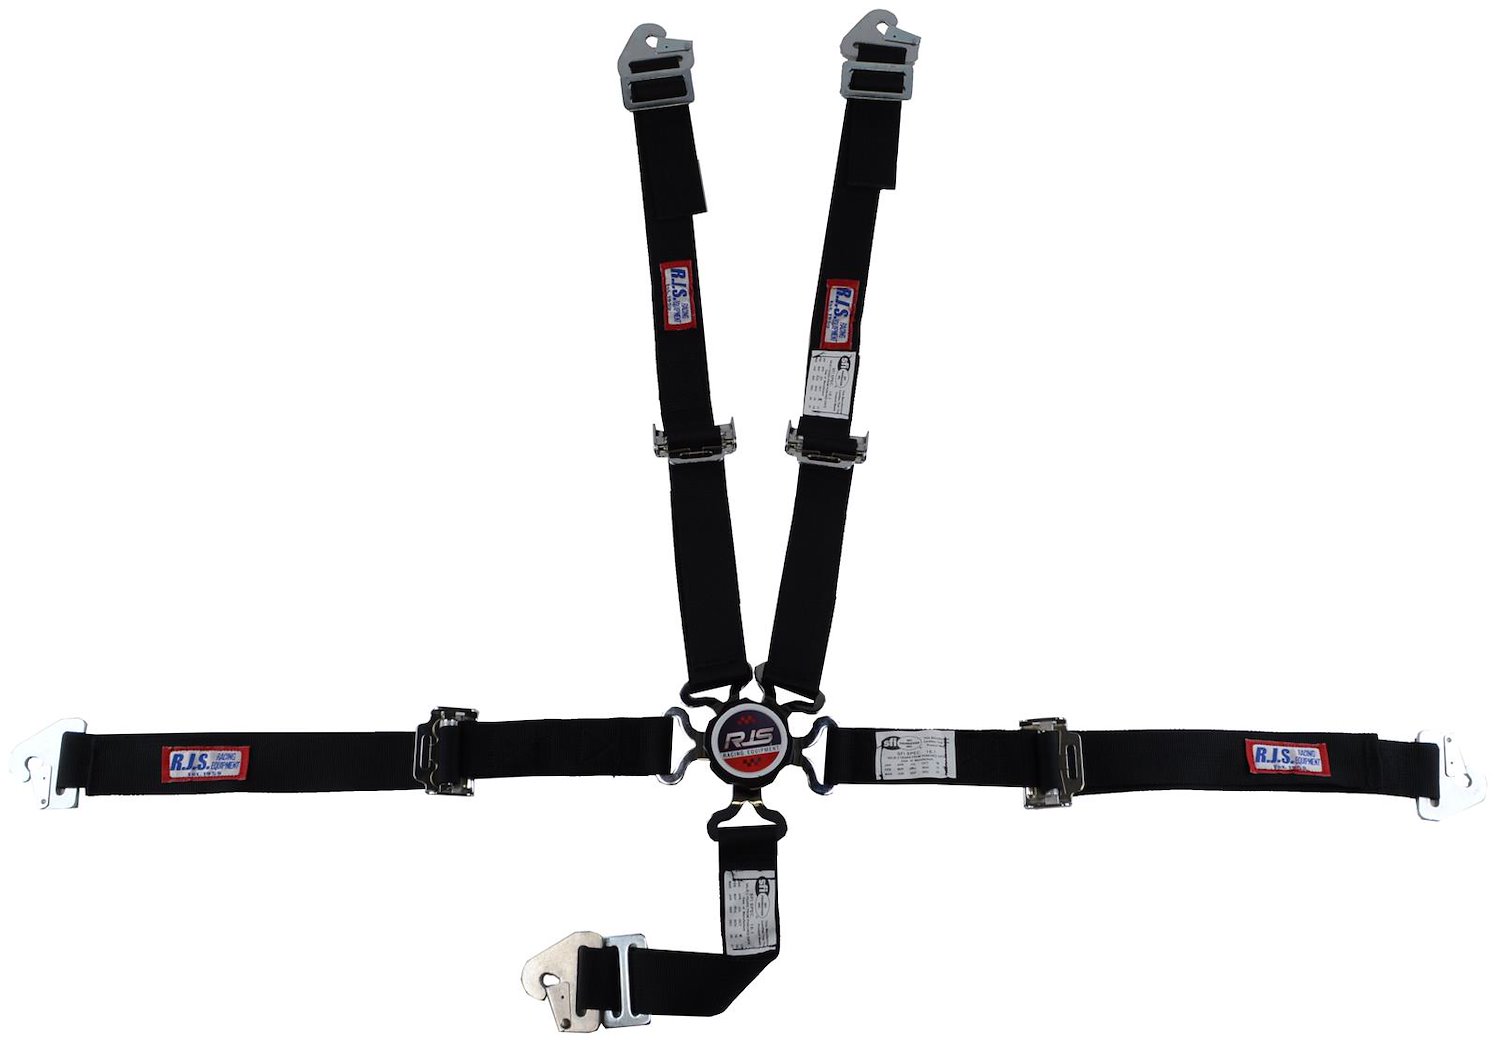 SFI 16.1 CAM-LOCK HARNESS 2 PULL UP Lap Belt 2 Shoulder Harness Individual FLOOR Mount 2 SINGLE Sub ALL WRAP ENDS RED